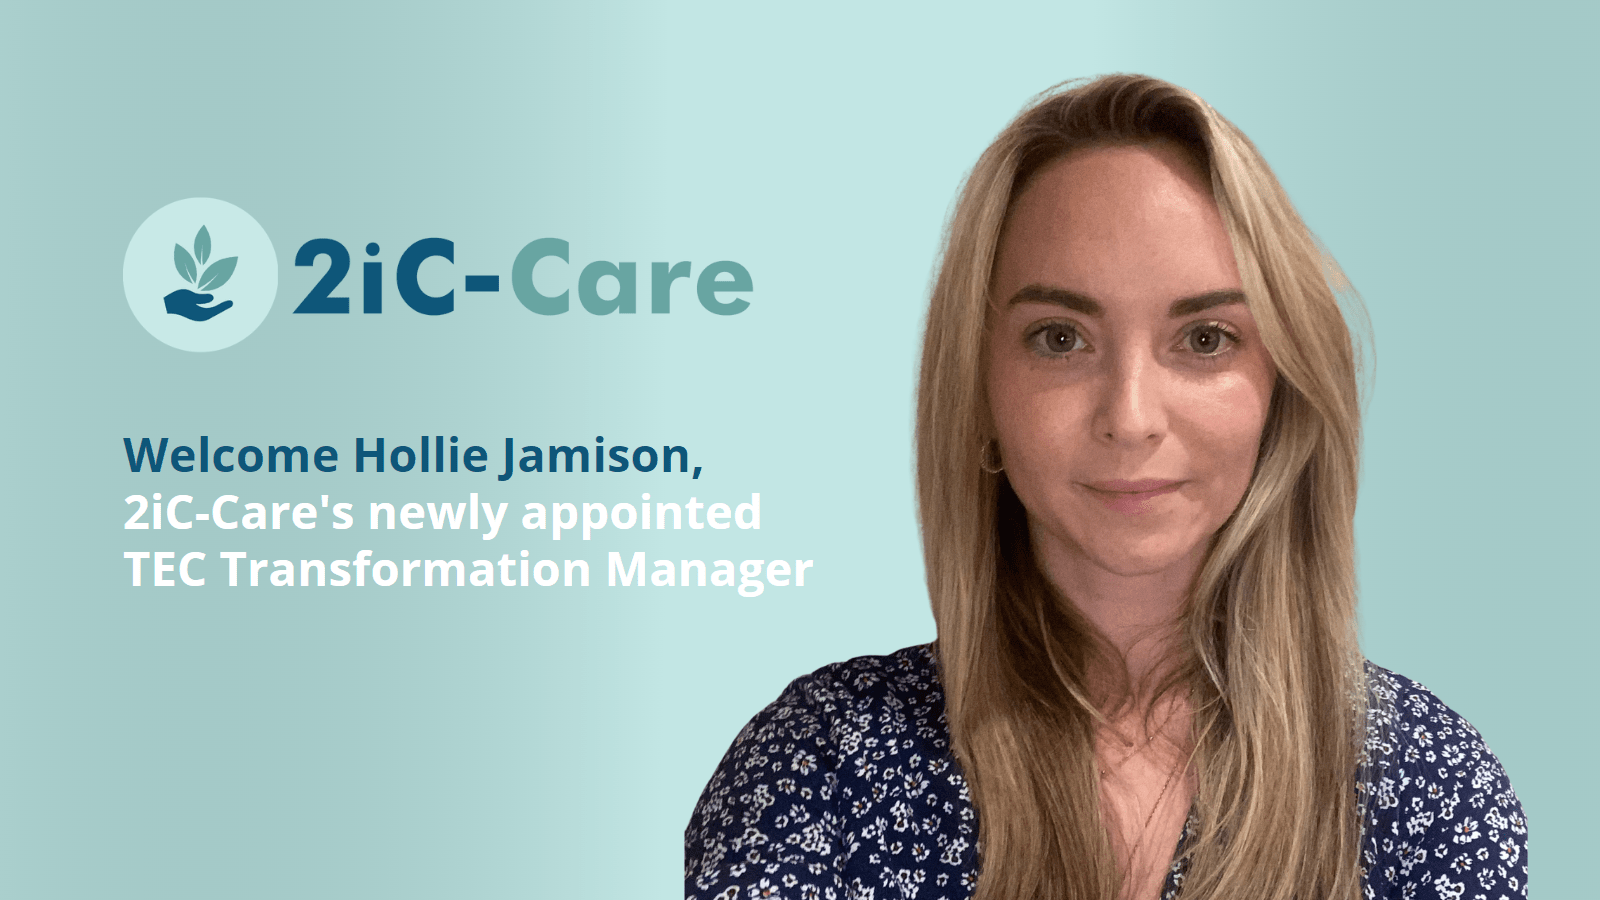 Meet the newest member of the 2iC-Care team!